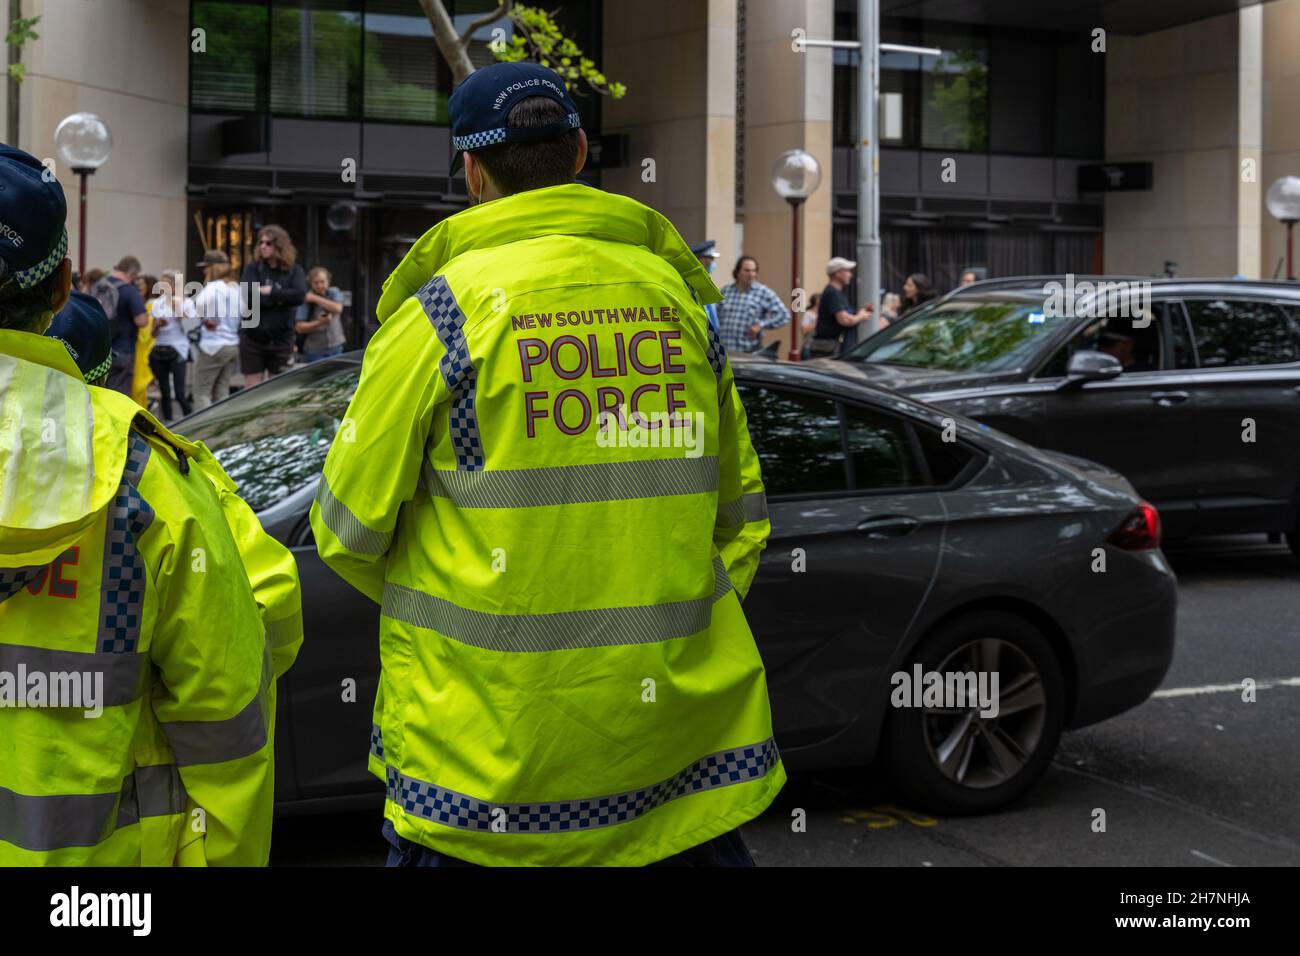 Police Force personnel in hi-vis. Cops manning the streets part of the freedom rally protest against vaccine mandates, restrictions and lockdowns Stock Photo